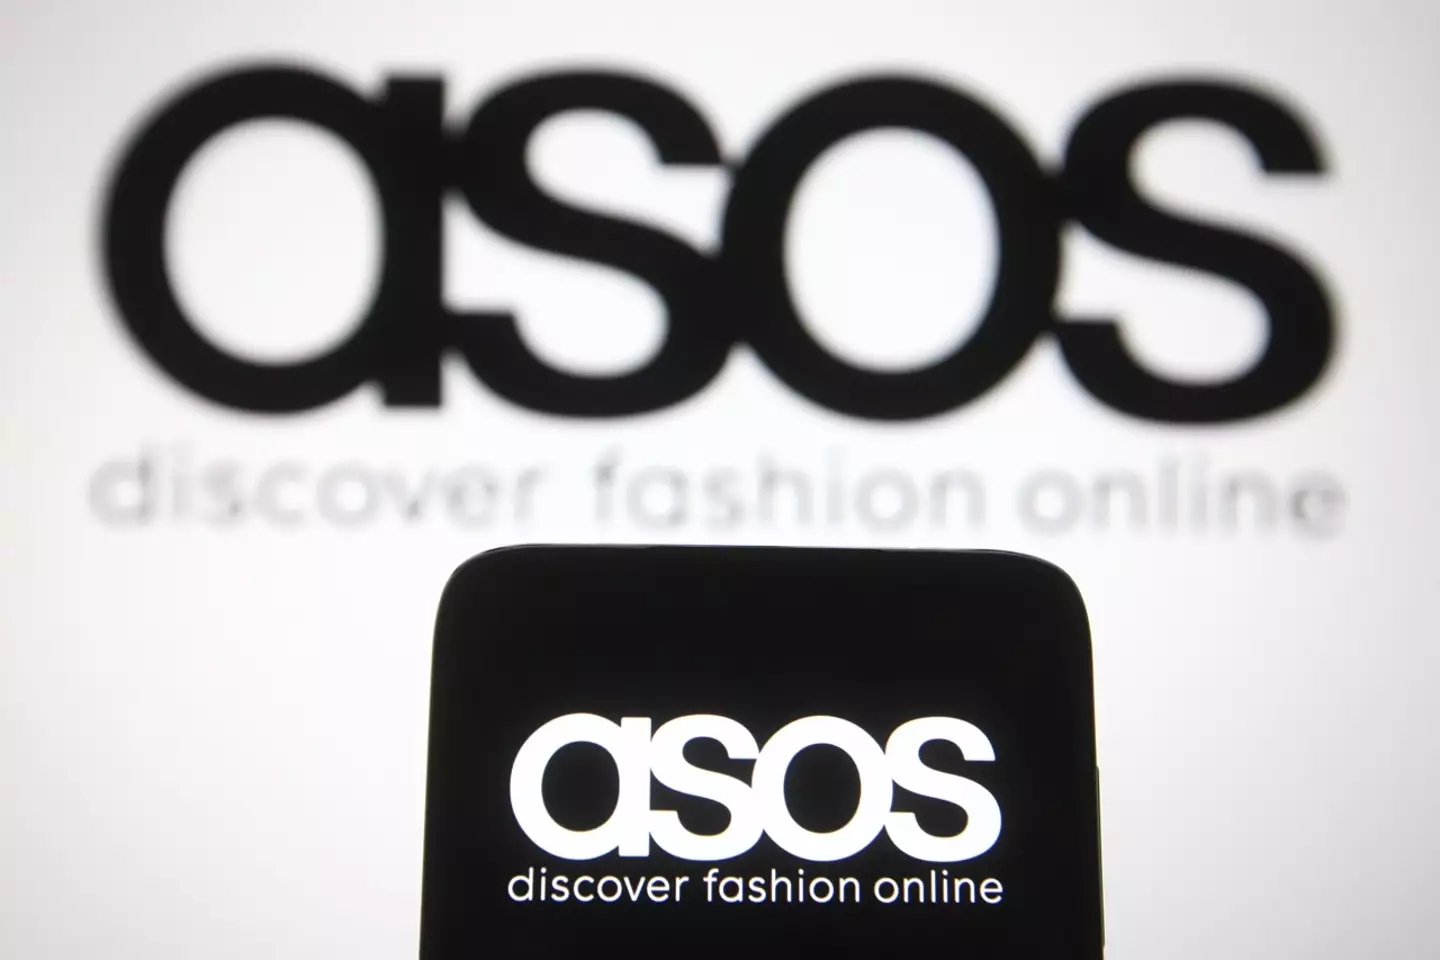 ASOS has done it again with their sample sale website where everything is only £5.